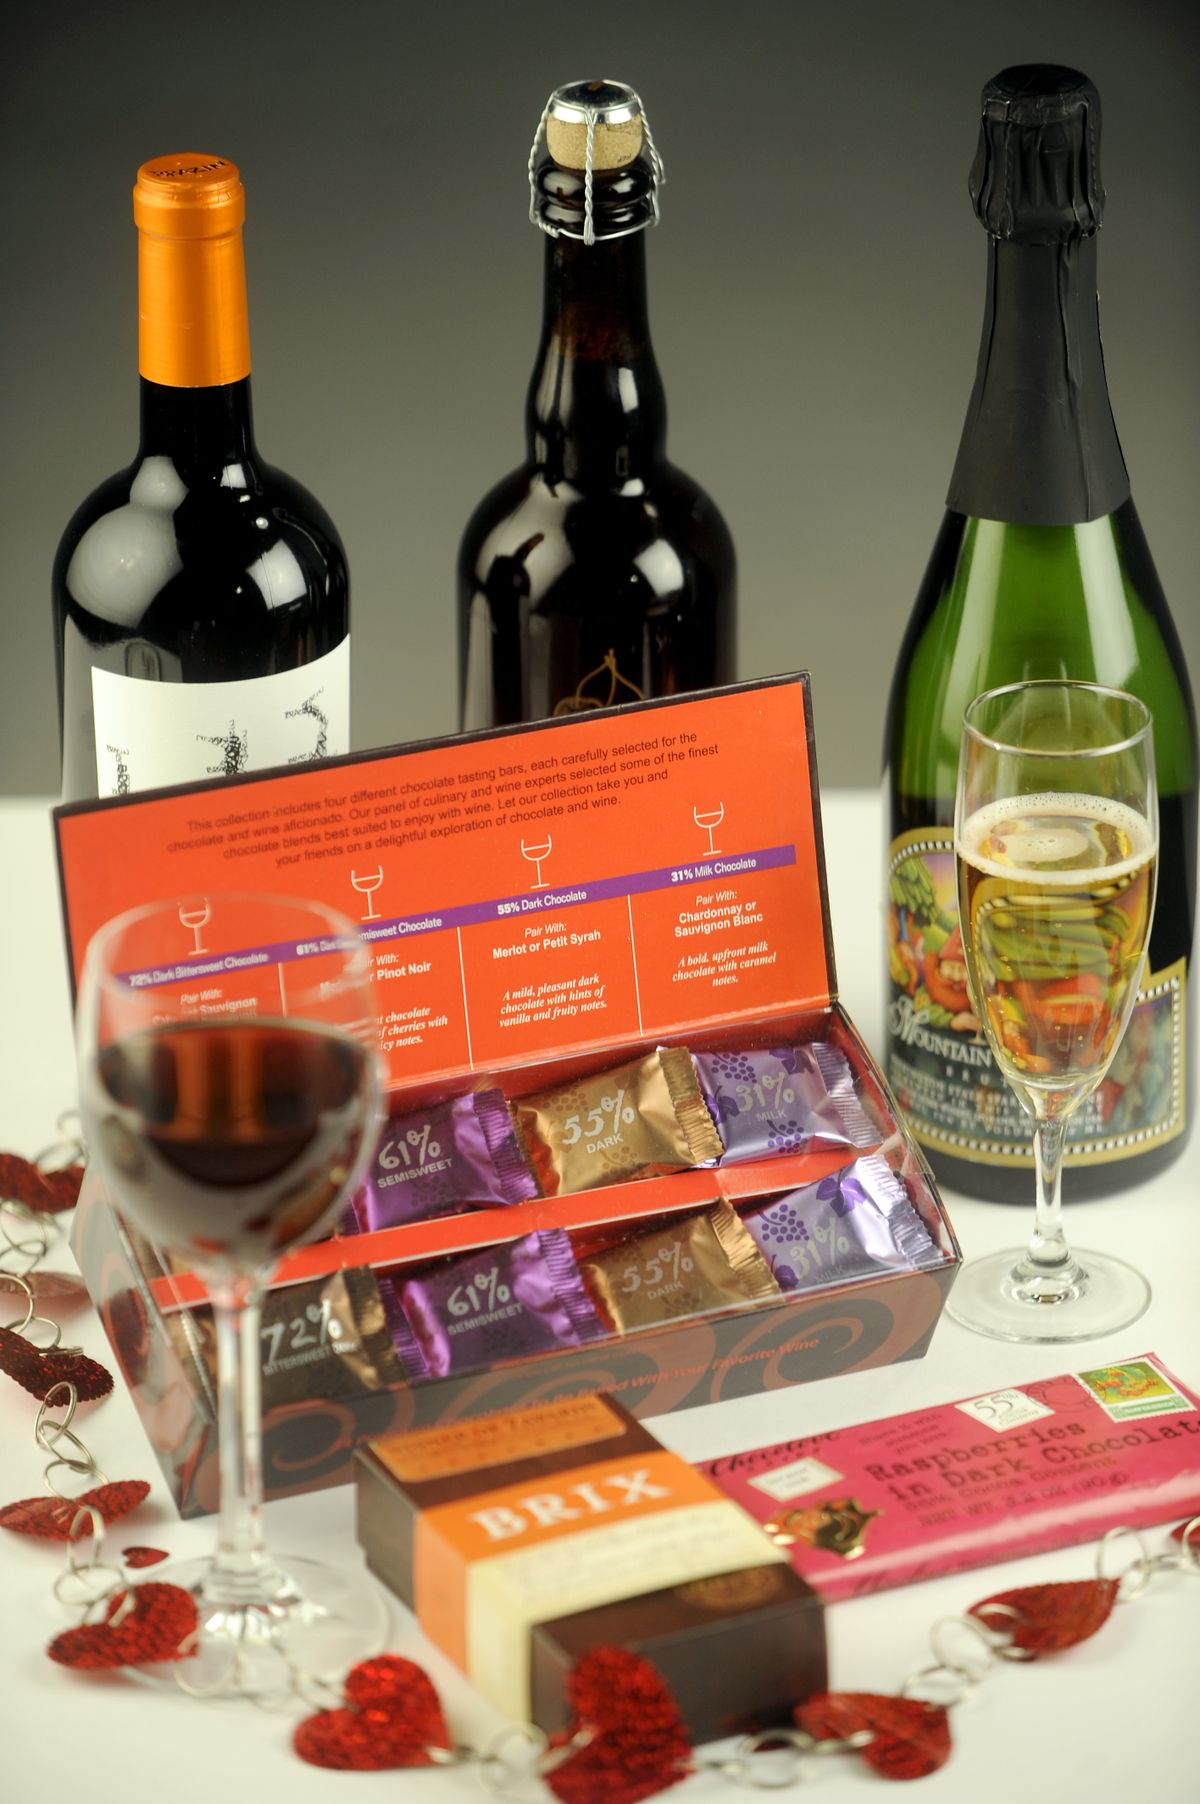 Wine, sparkling wine, beer and chocolates can be enjoyed as part of a Valentine’s Day meal or special treat. (Jesse Tinsley / The Spokesman-Review)